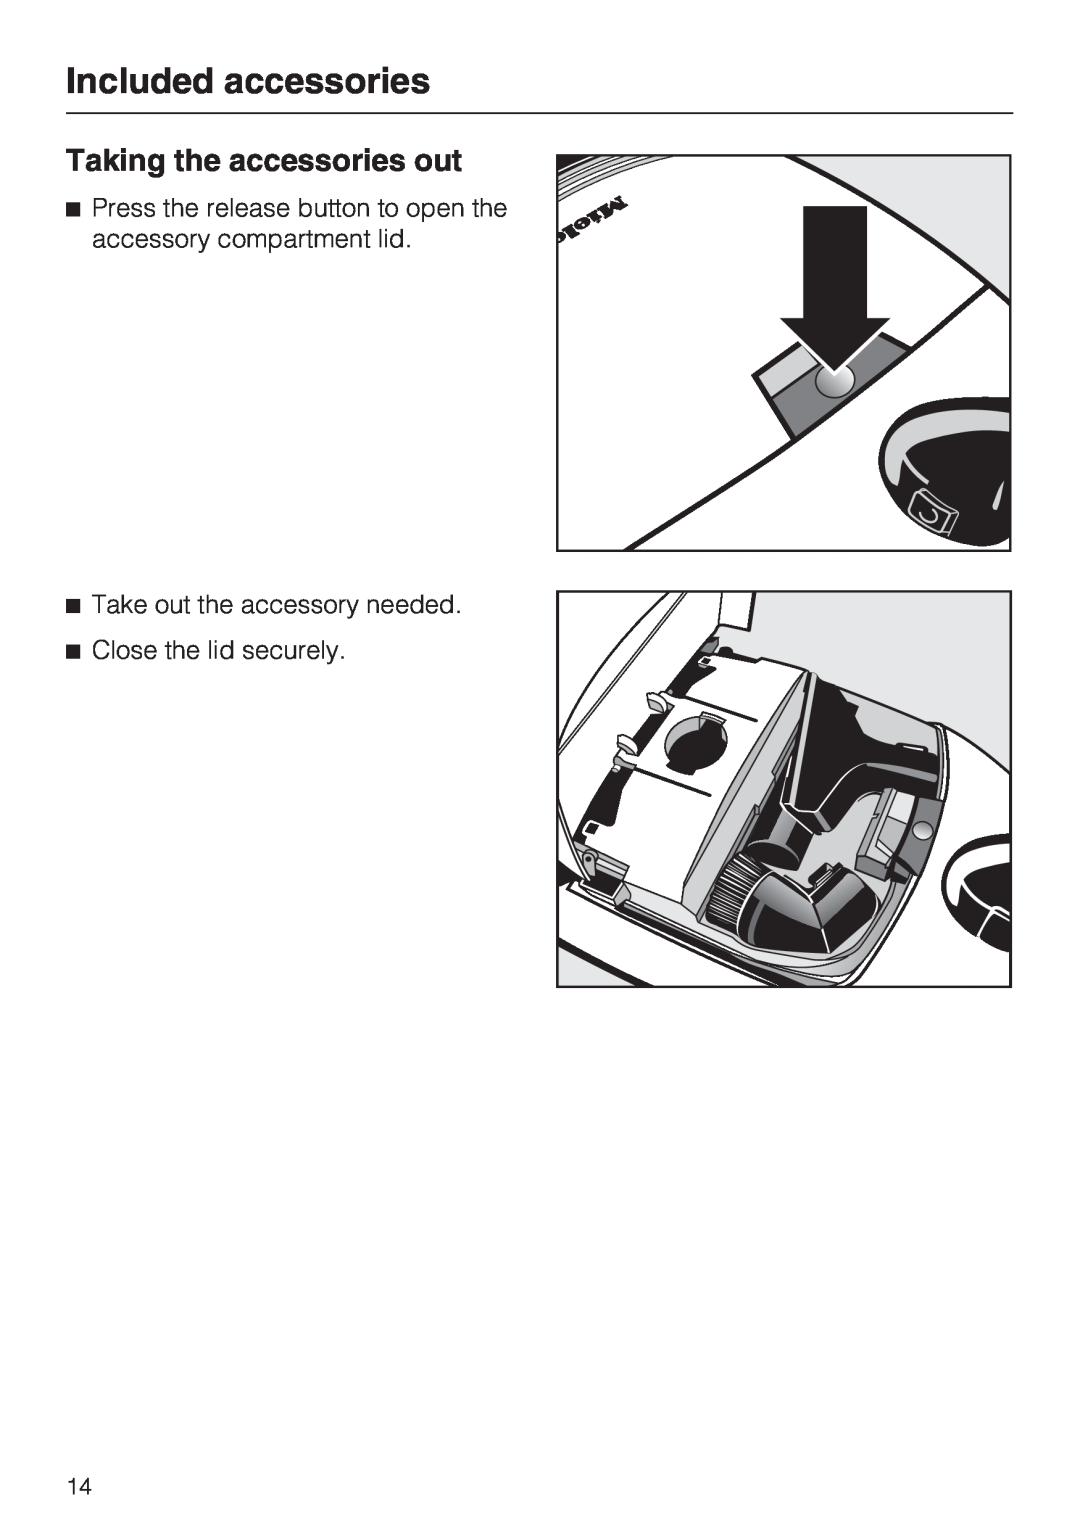 Miele S 700, S 768 Included accessories, Taking the accessories out, Take out the accessory needed, Close the lid securely 